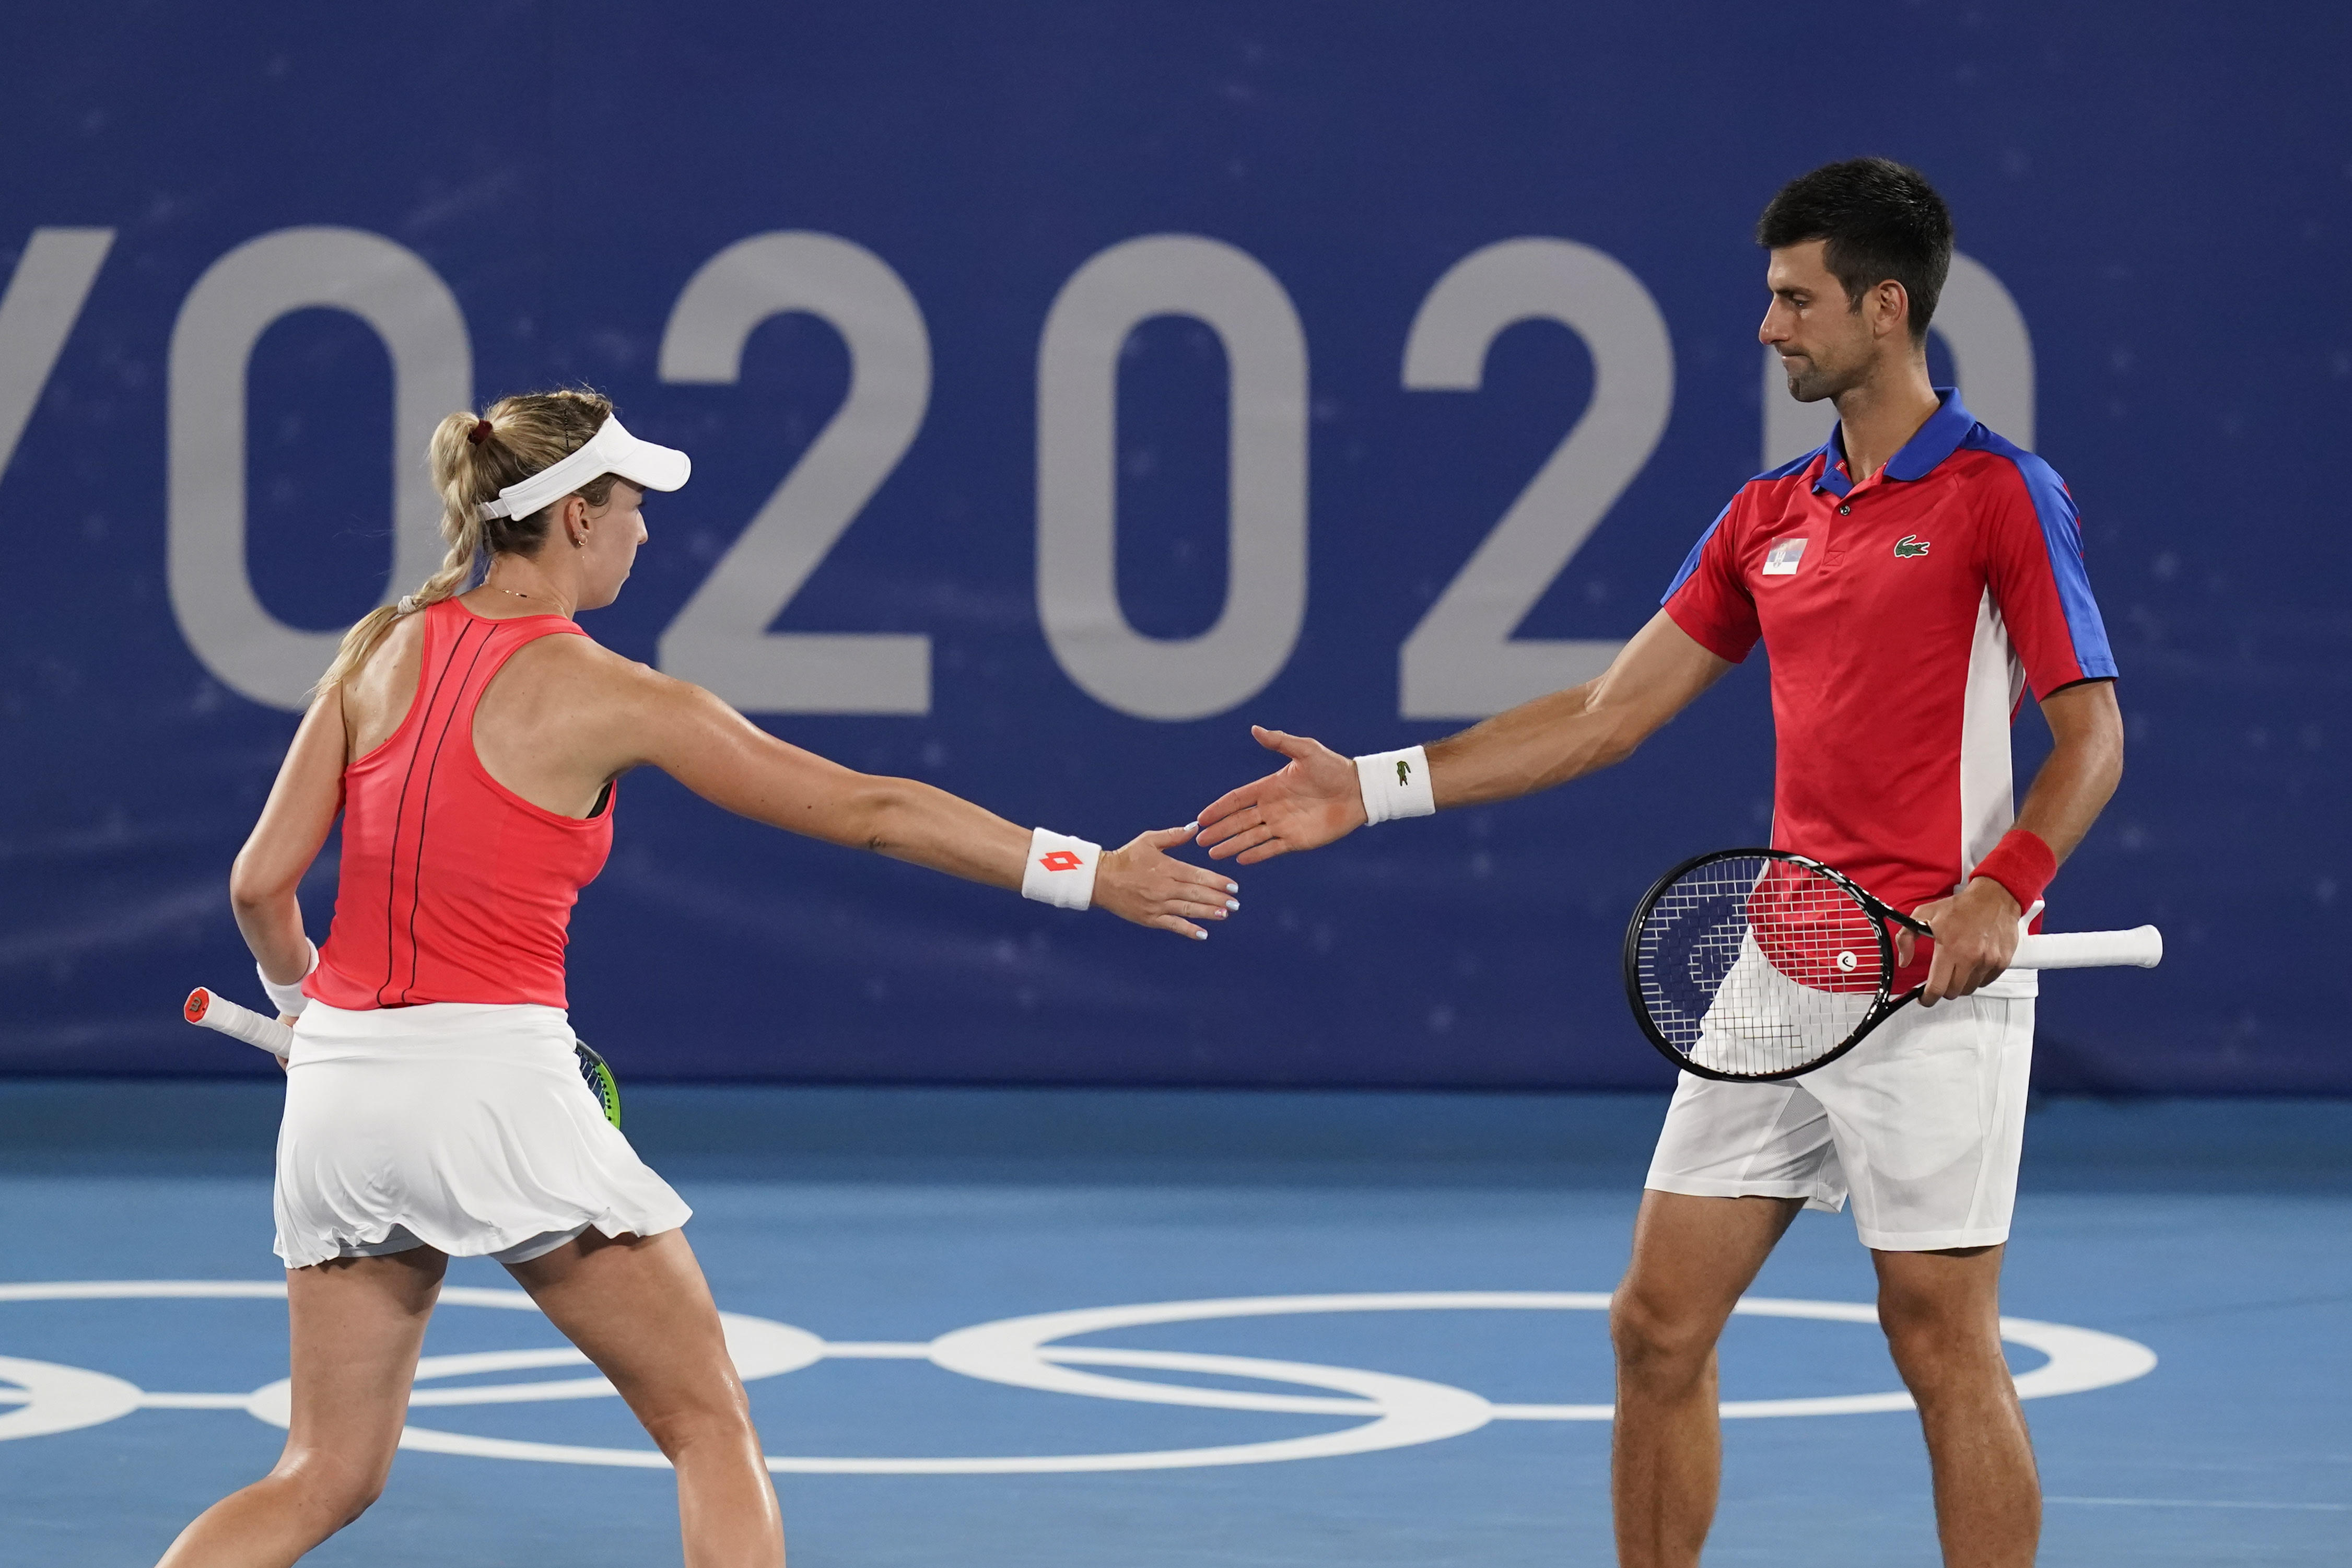 Tennis mixed doubles has its moment at the Olympics